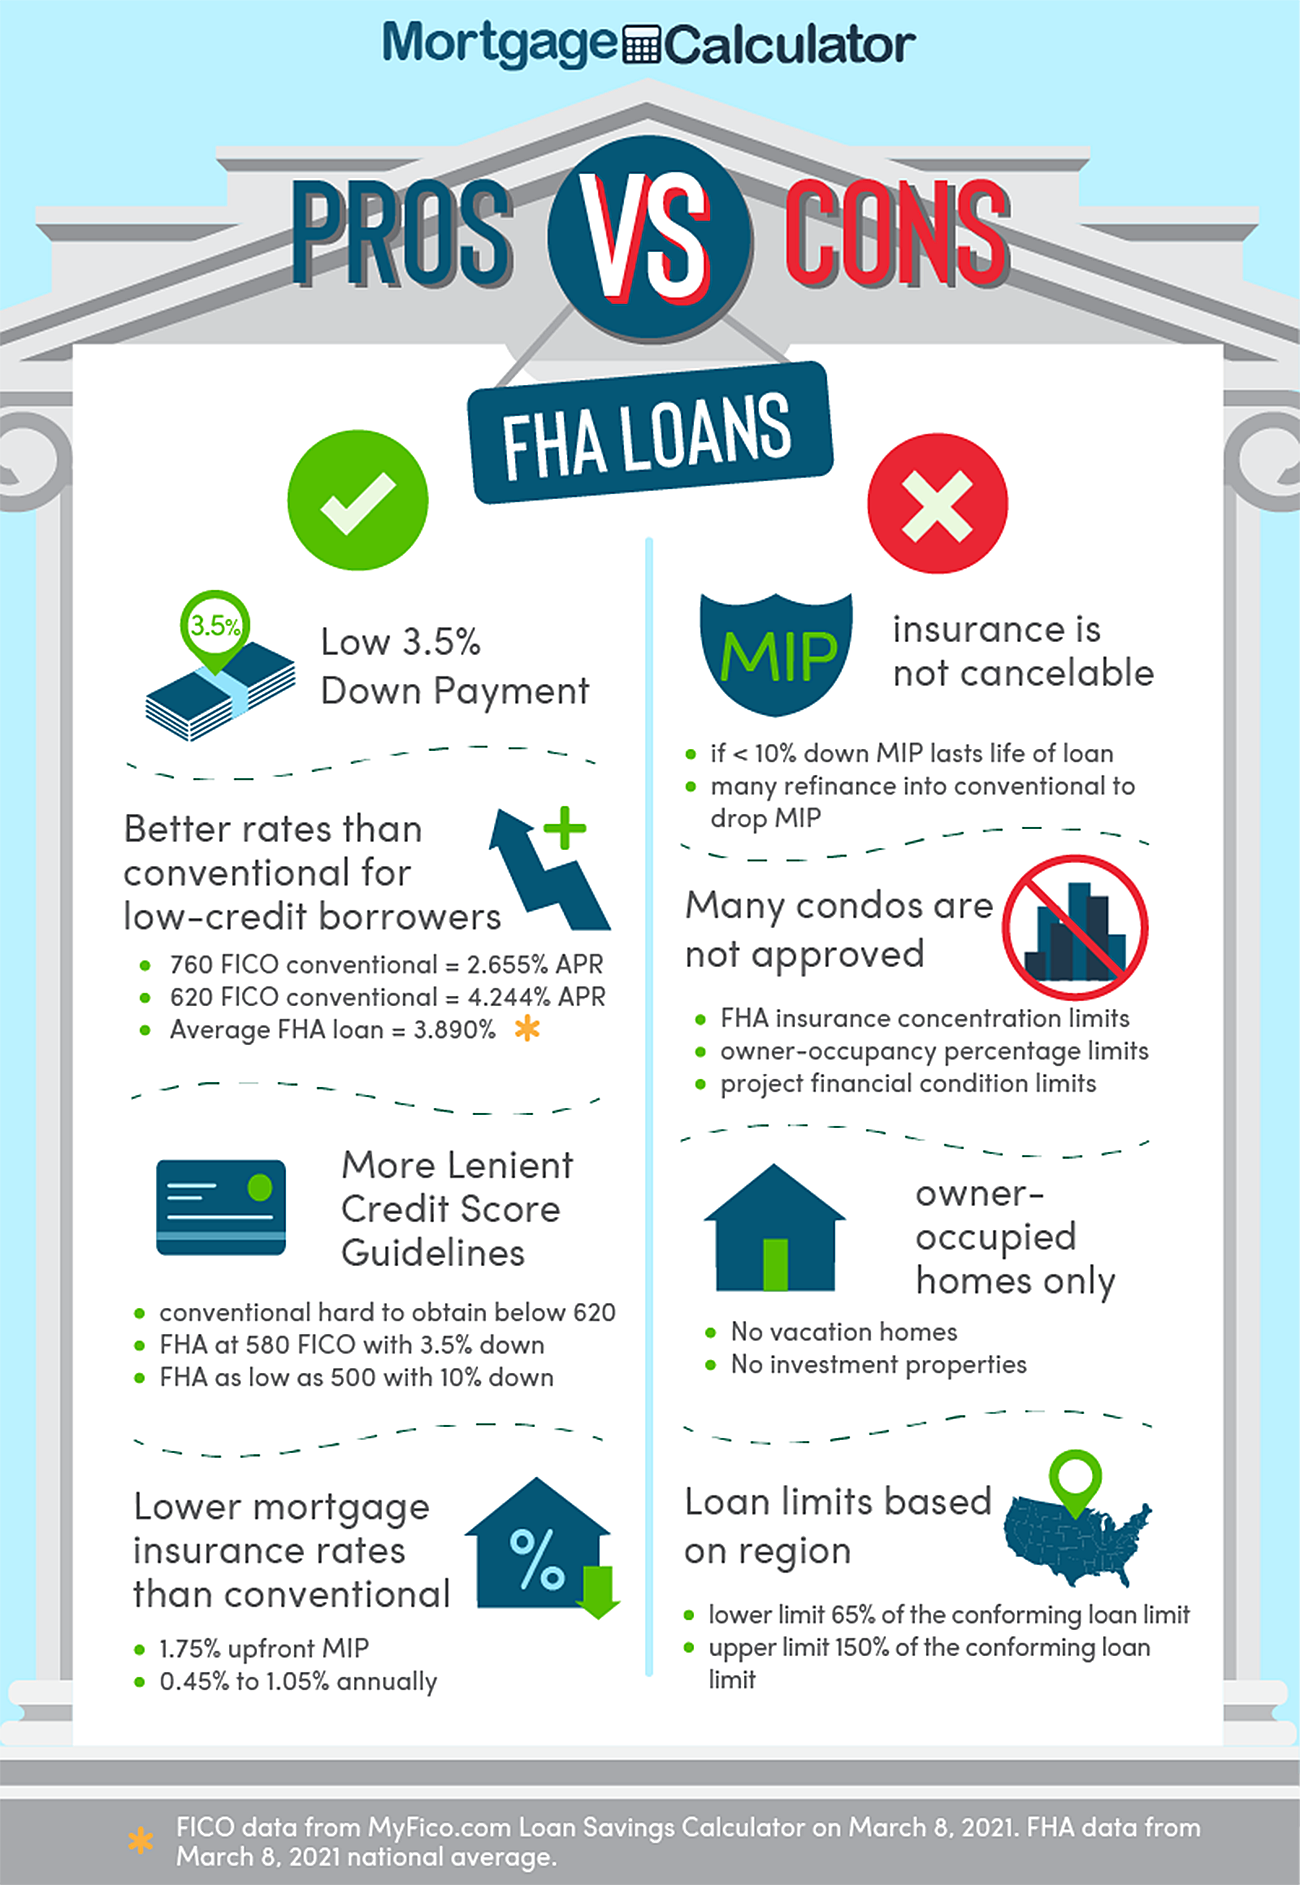 FHA loan pros and cons.